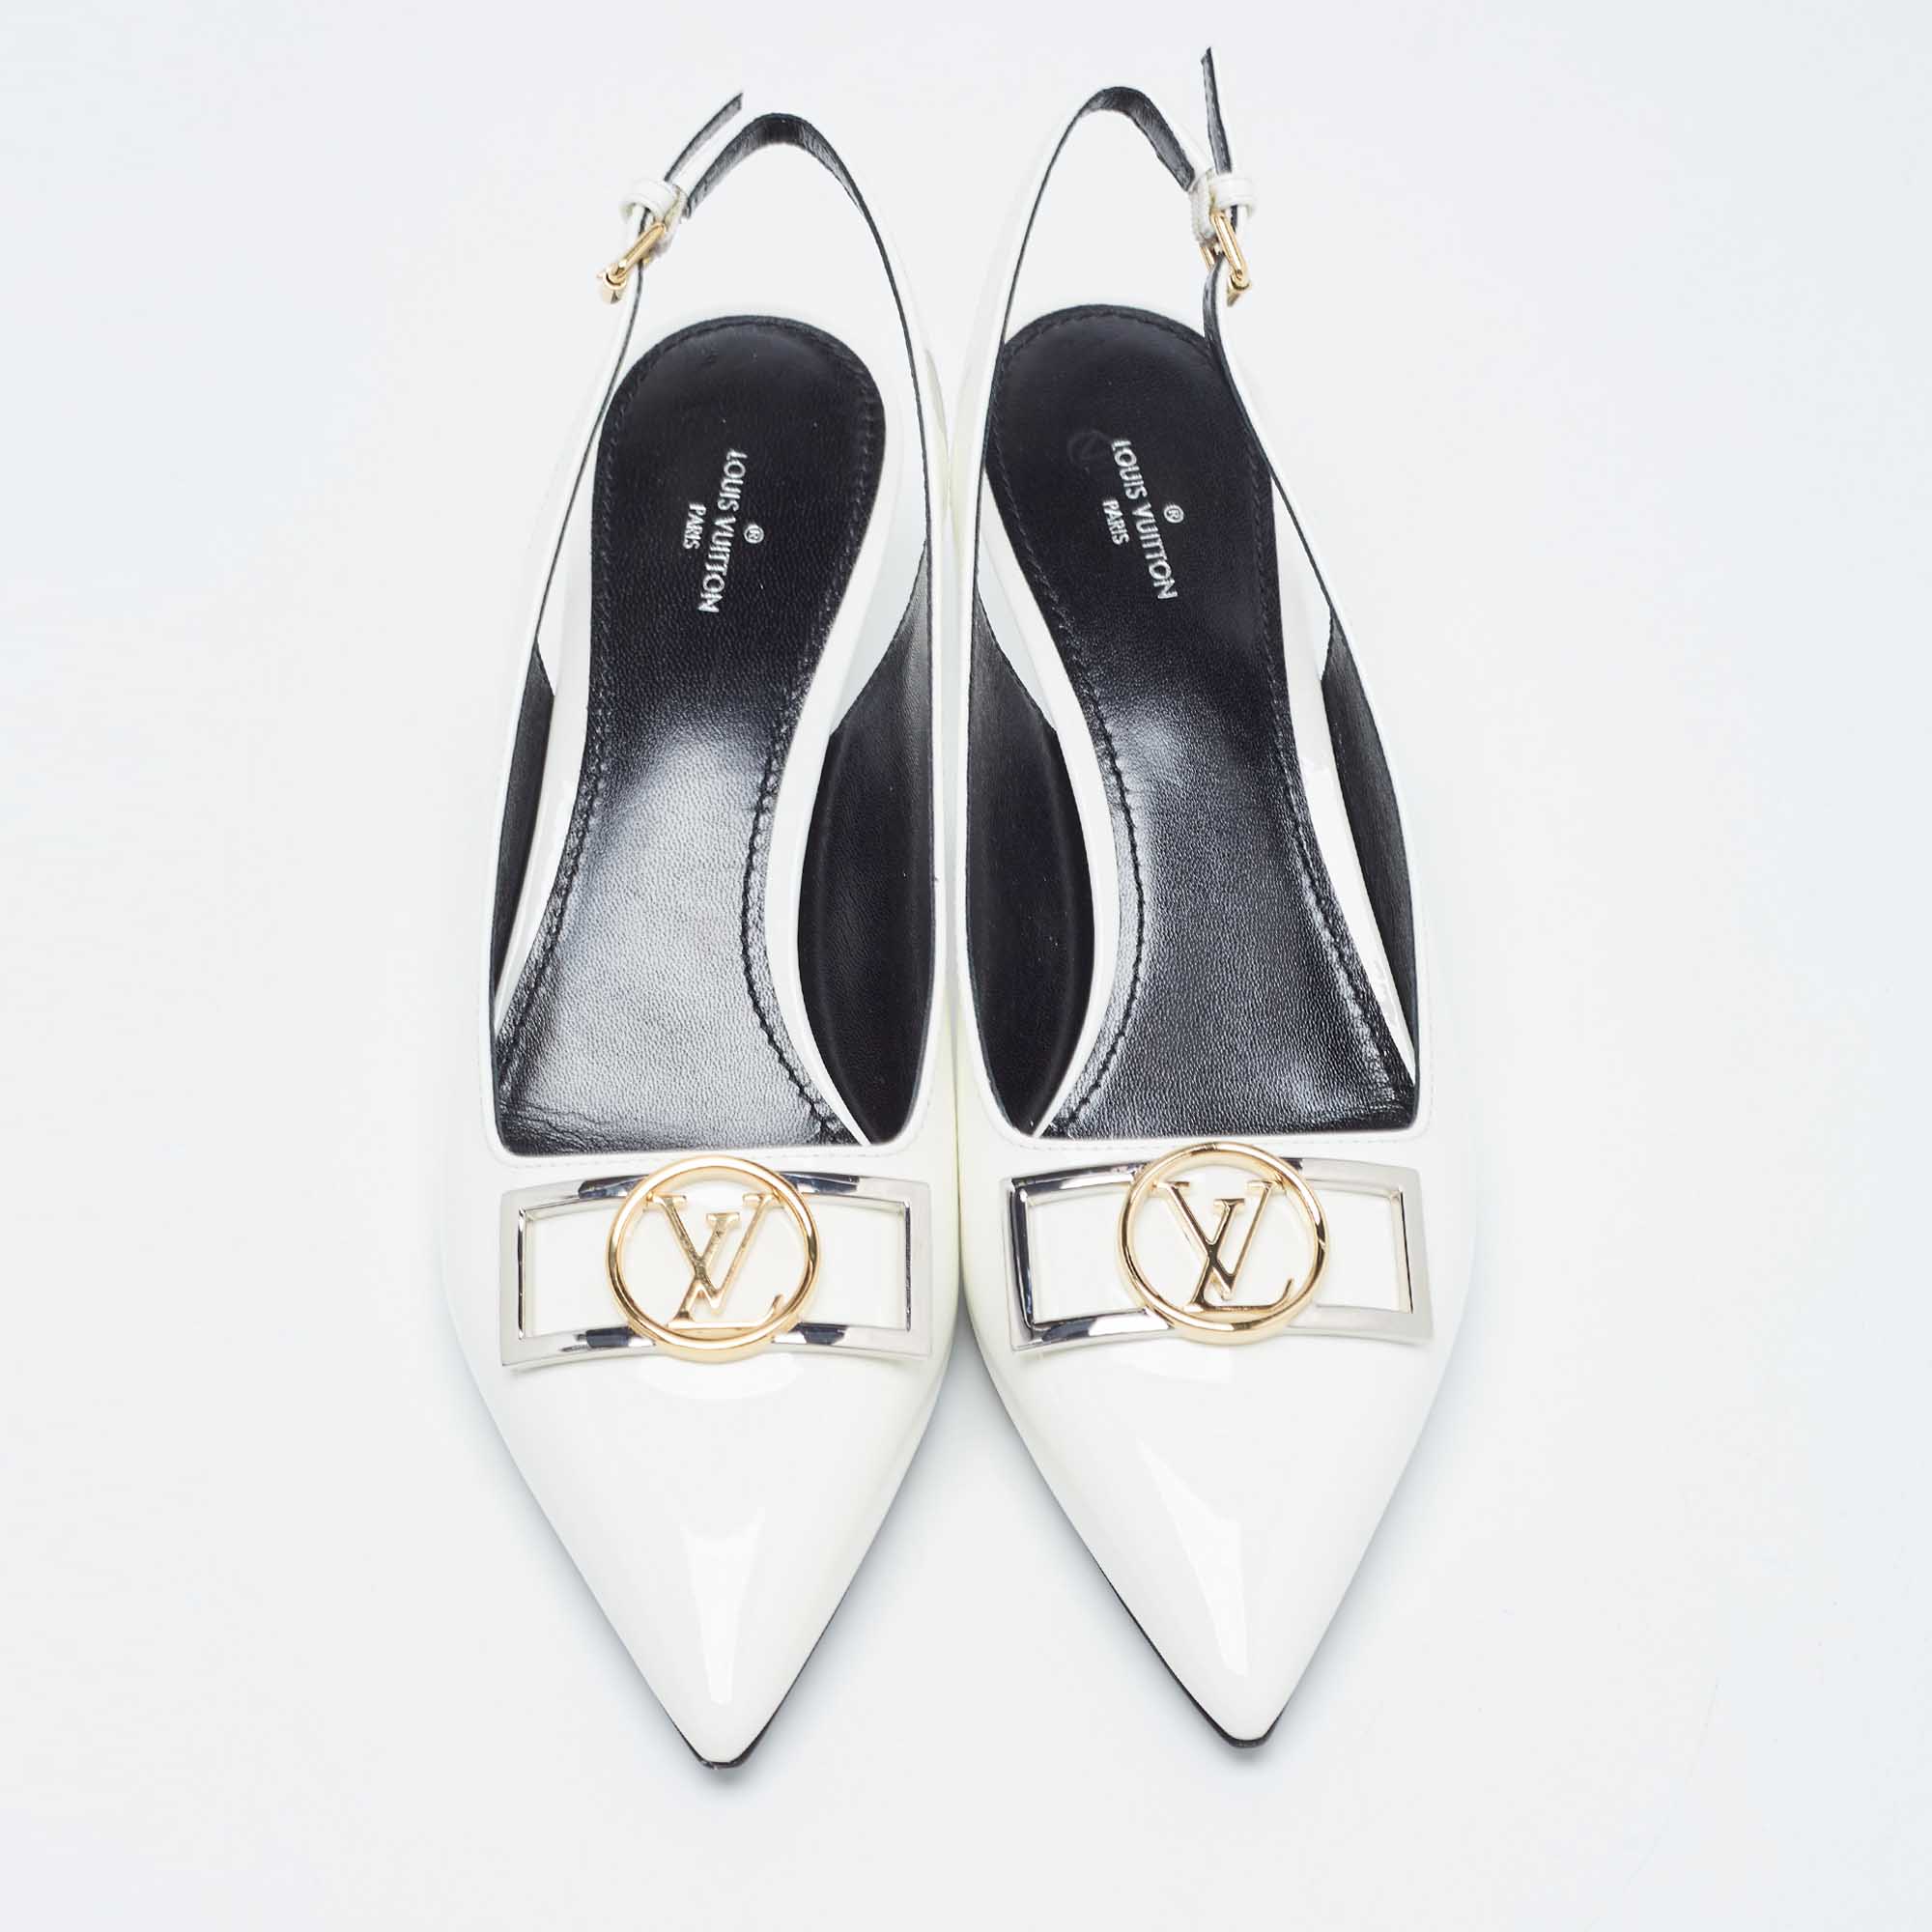 Louis Vuitton White Patent Leather Insider Slingback Pump Size 39.5